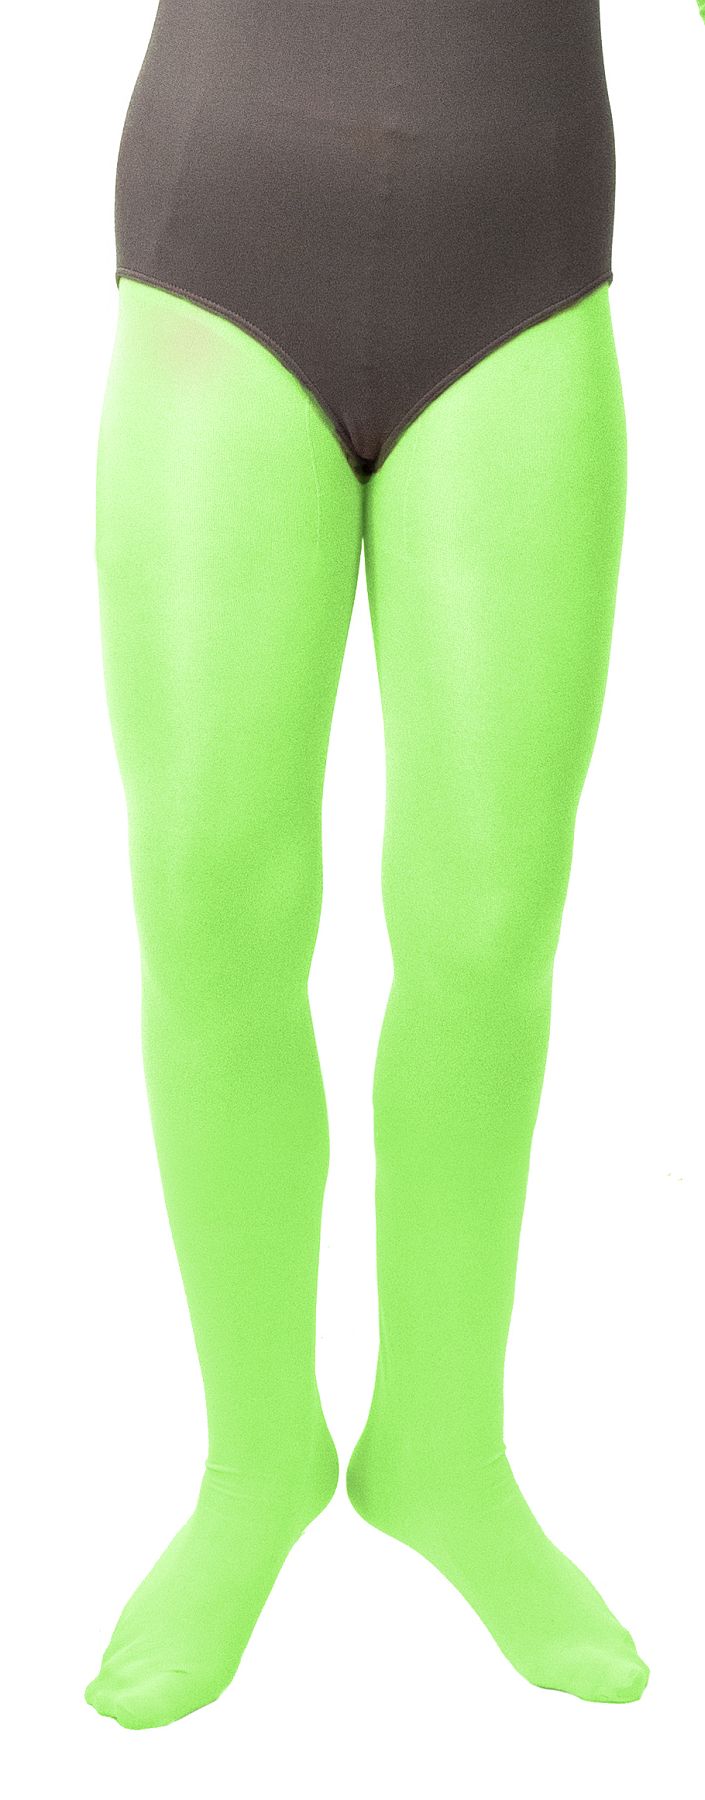 Opaque tights, neon-green